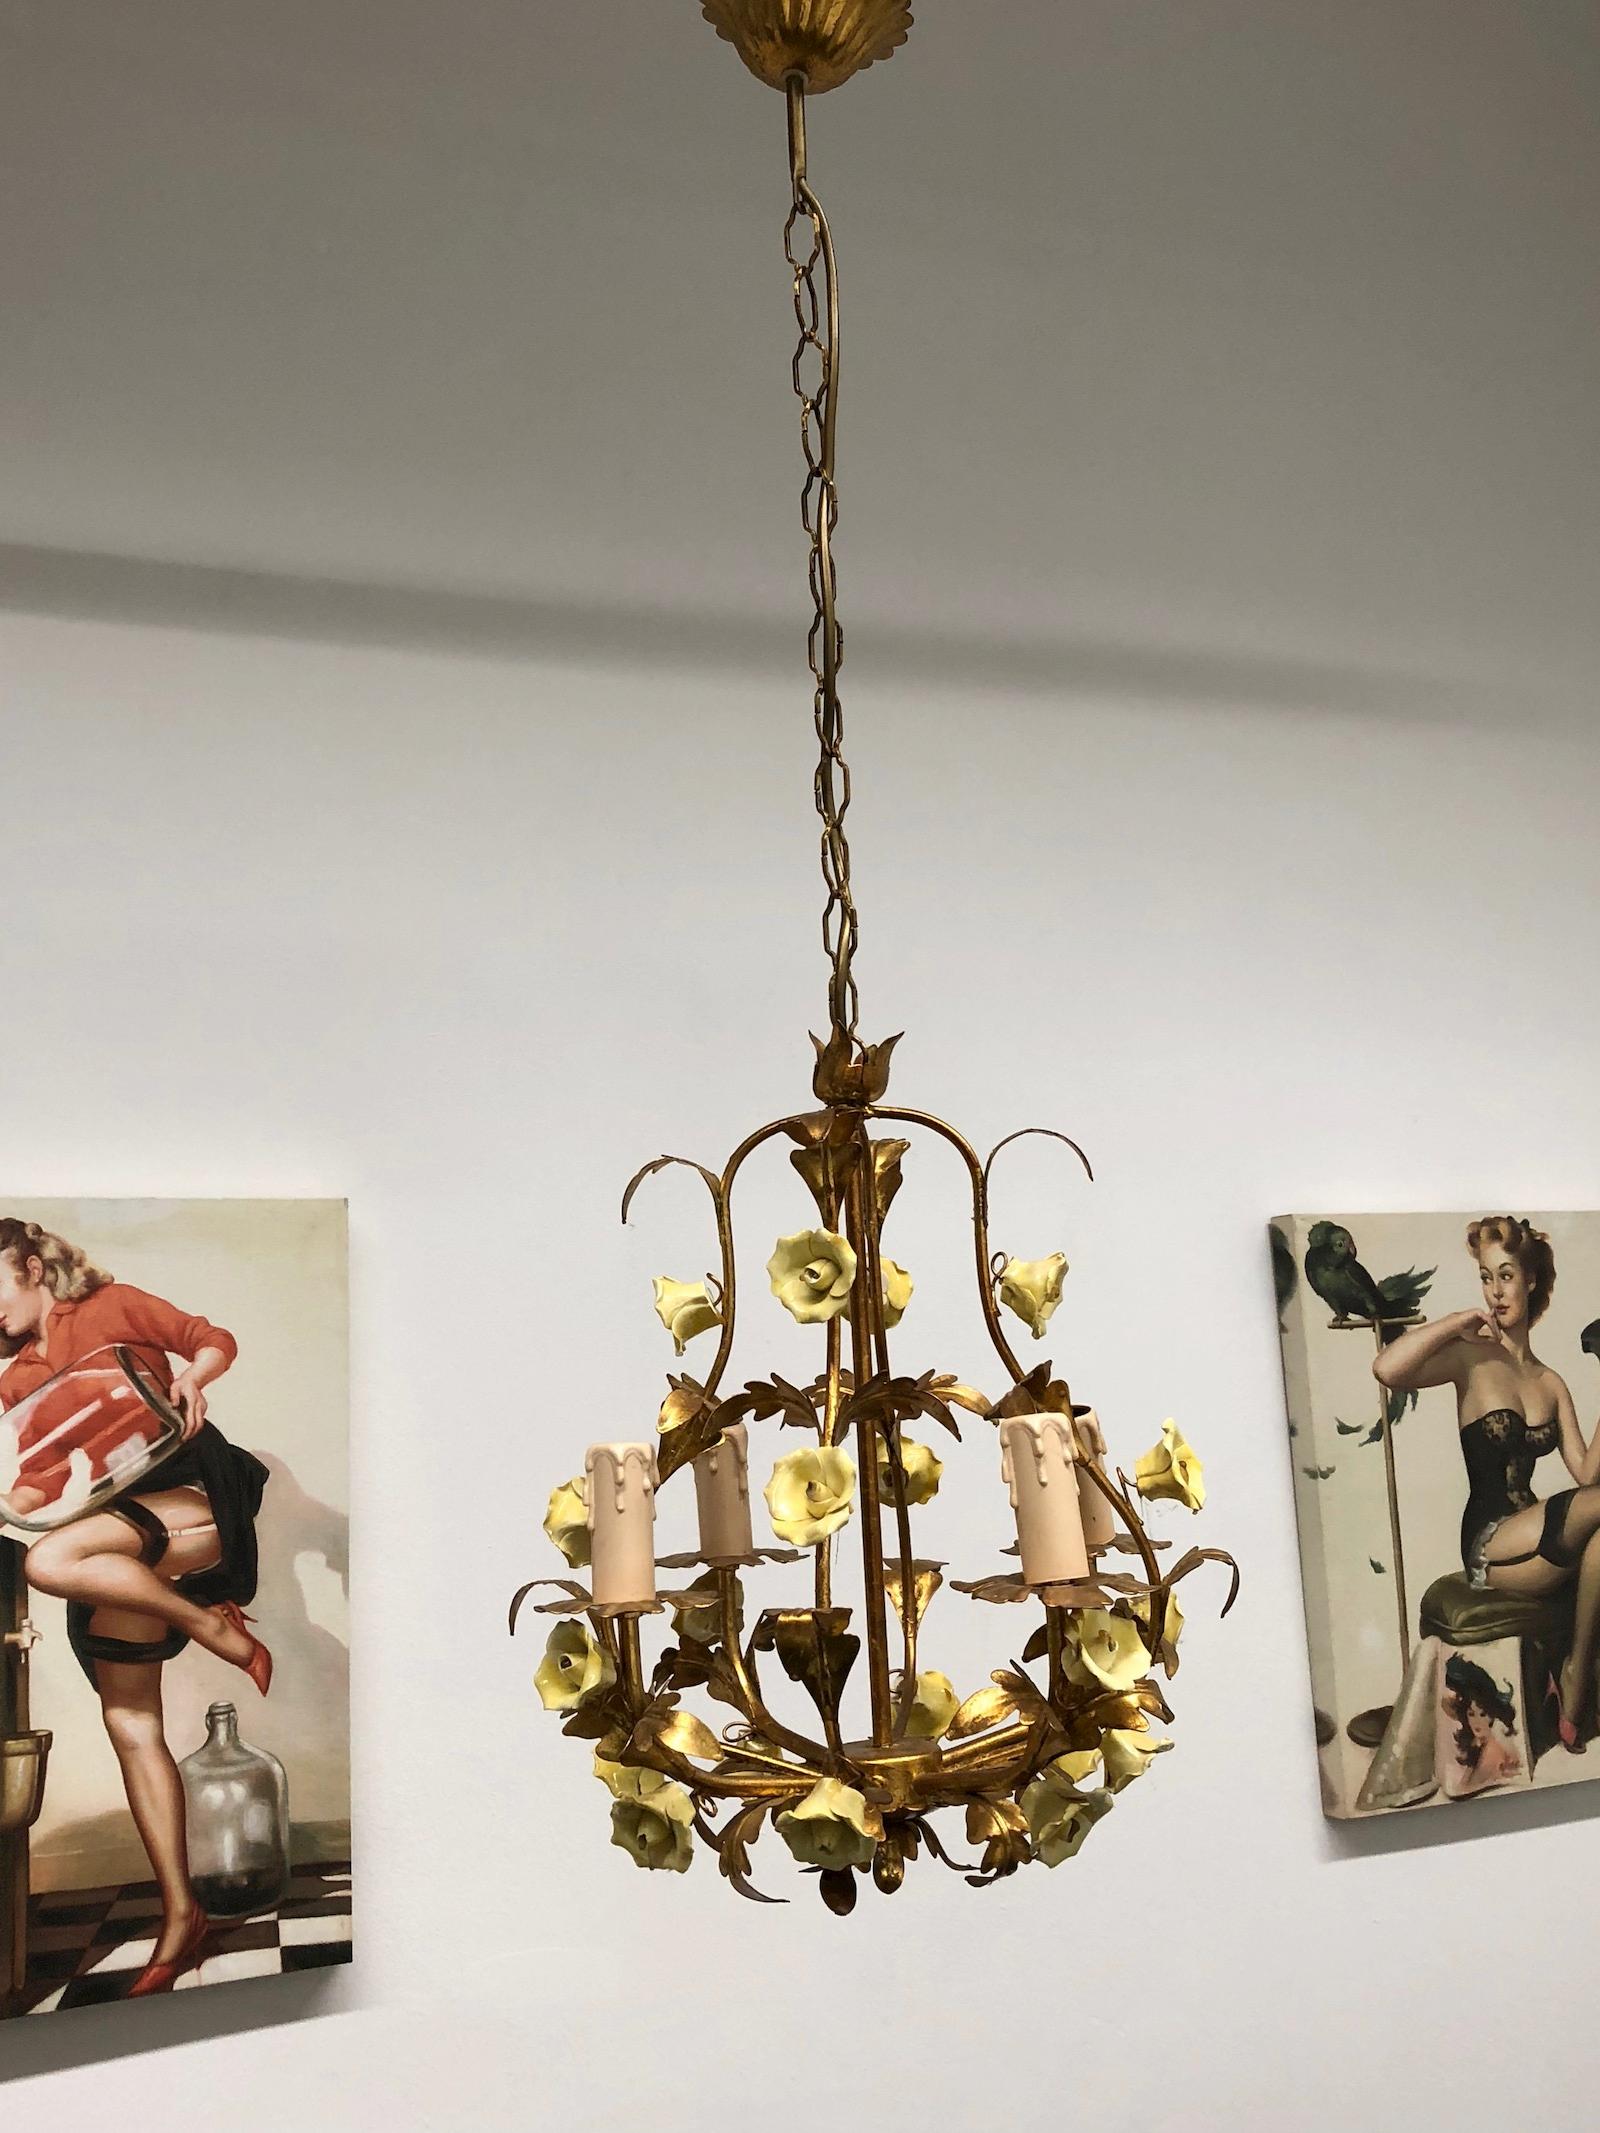 Add a touch of Italian opulence to your home with this charming chandelier! Perfect flowers, made of Majolica, to enhance any chic or eclectic home. We'd love to see it hanging in an entryway as a charming welcome home. The chain with canopy is